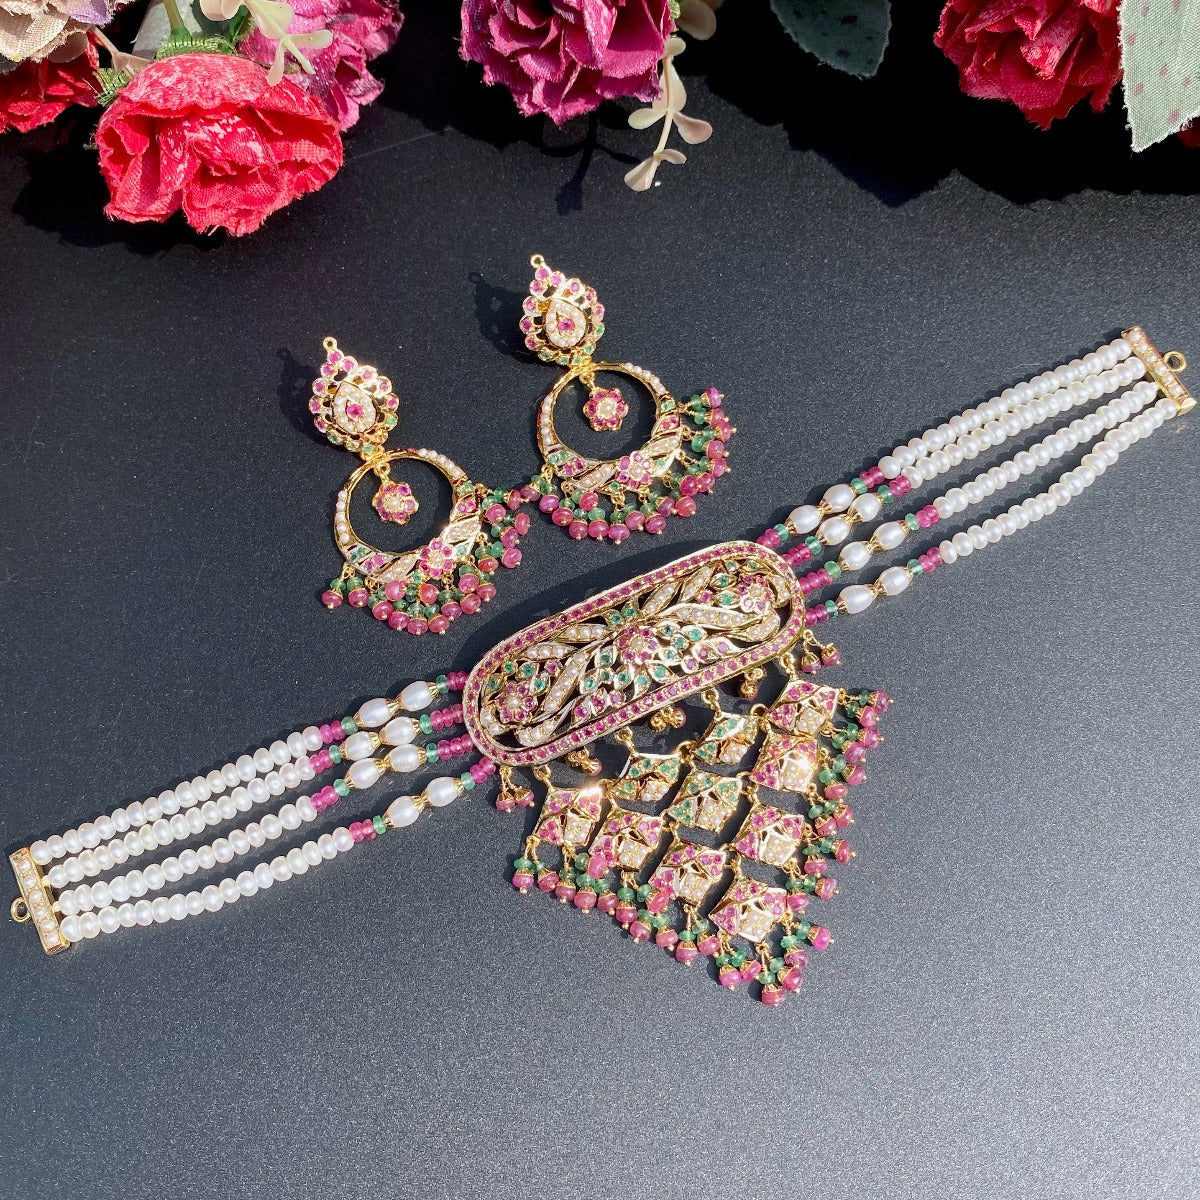 traditioanal rajasthani aad necklace with v shaped jaal